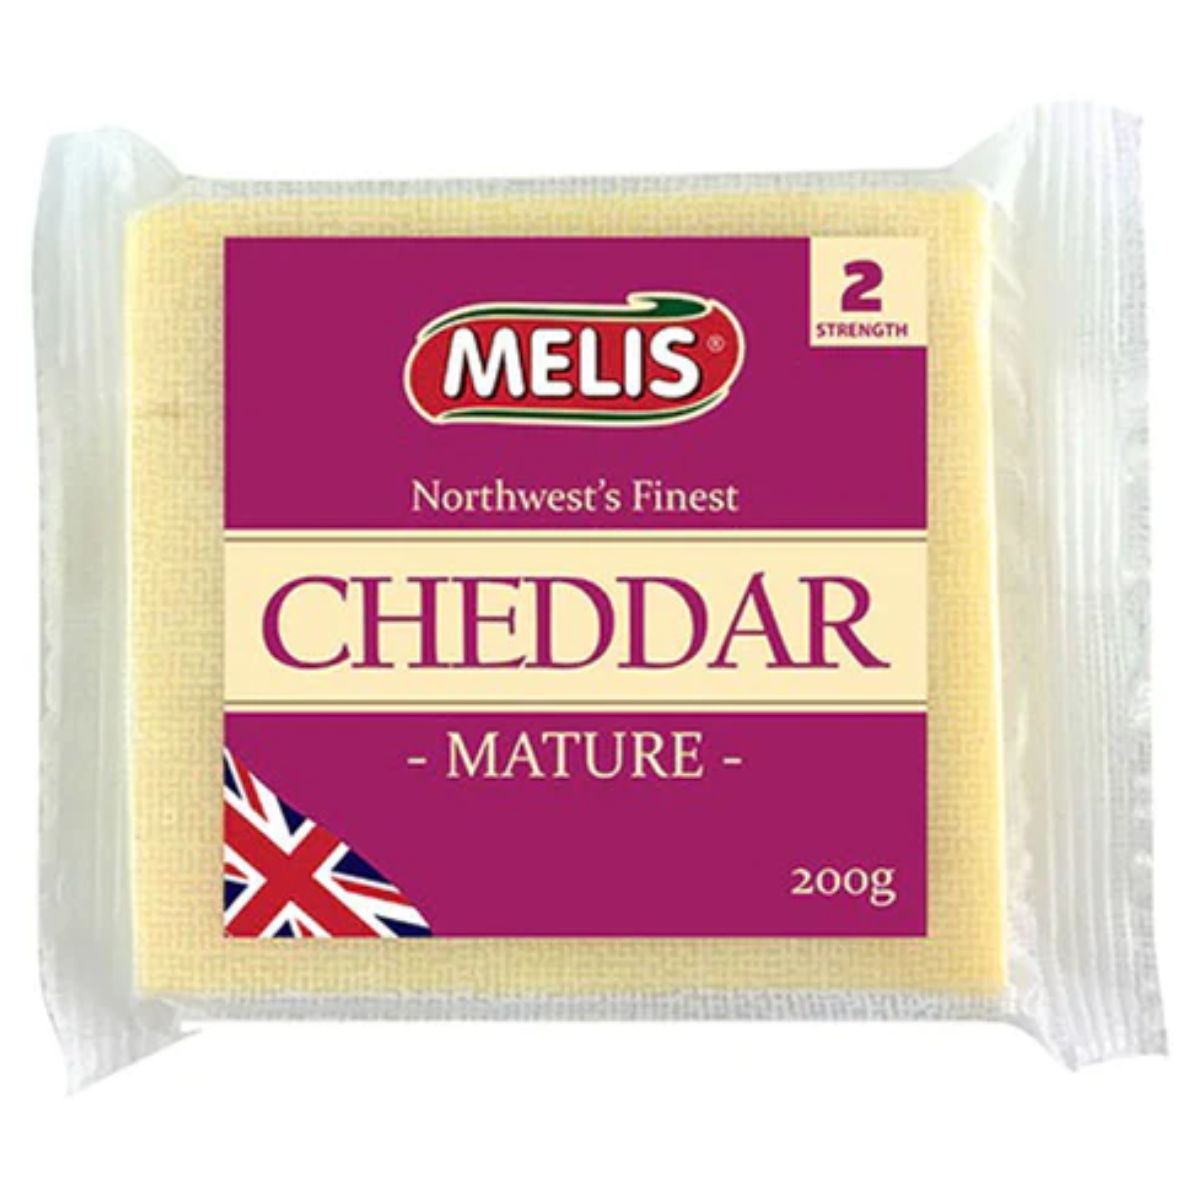 Melis - Finest Cheddar Mature Cheese - 200g.